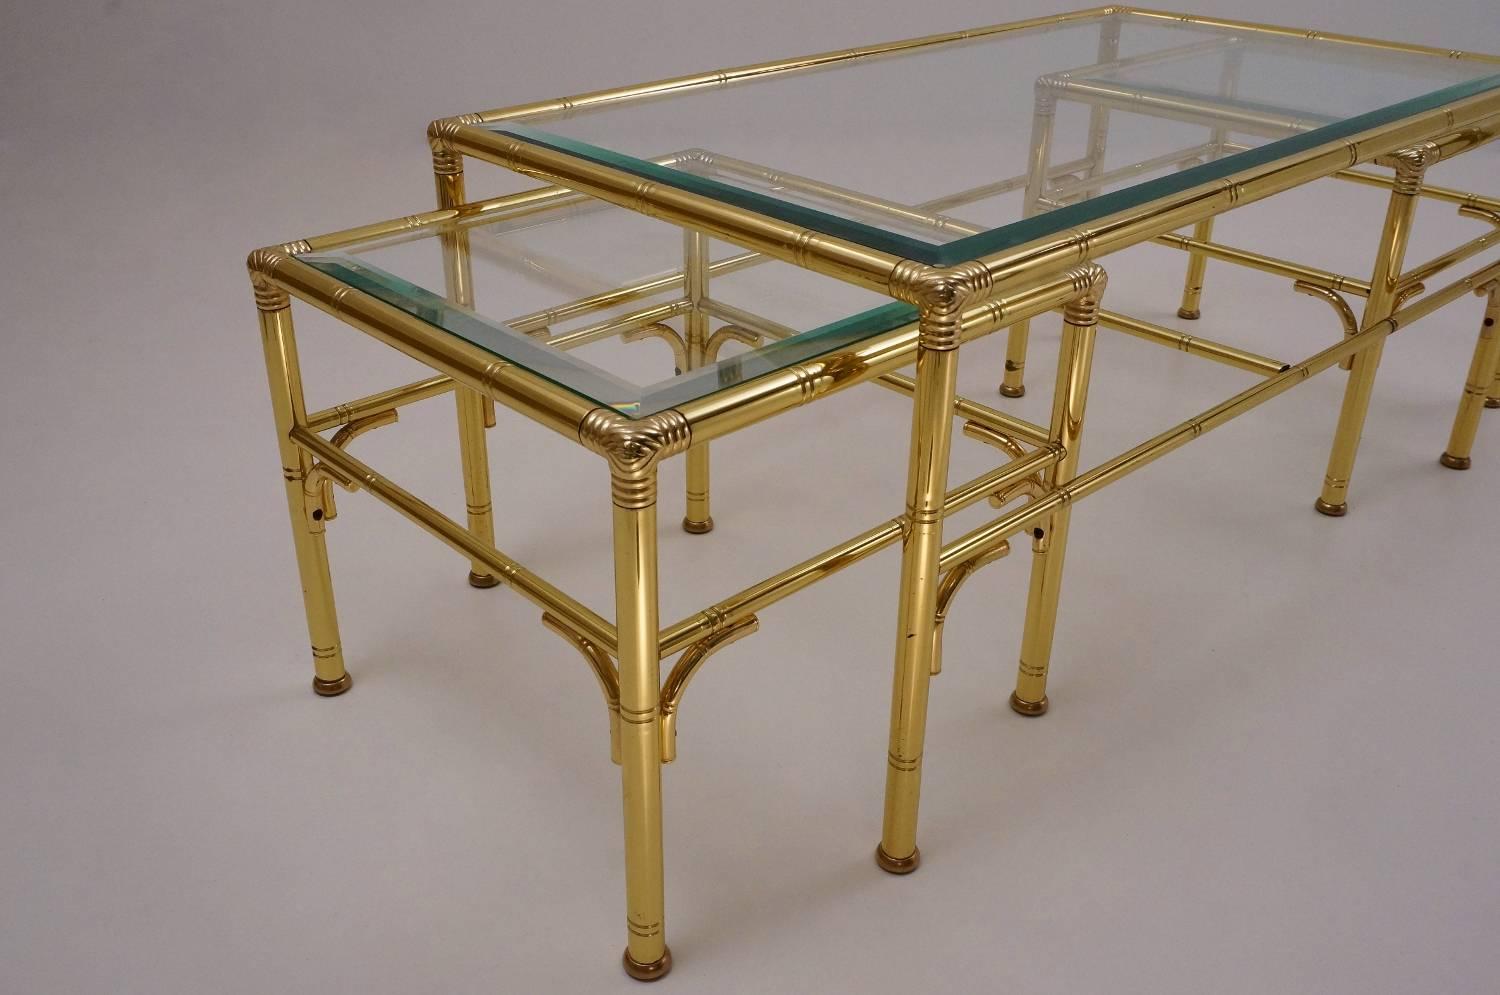 Late 20th Century Gold Coffee Table with Two Side Tables by Chelsom, 1980s, English, Maison Bagues For Sale